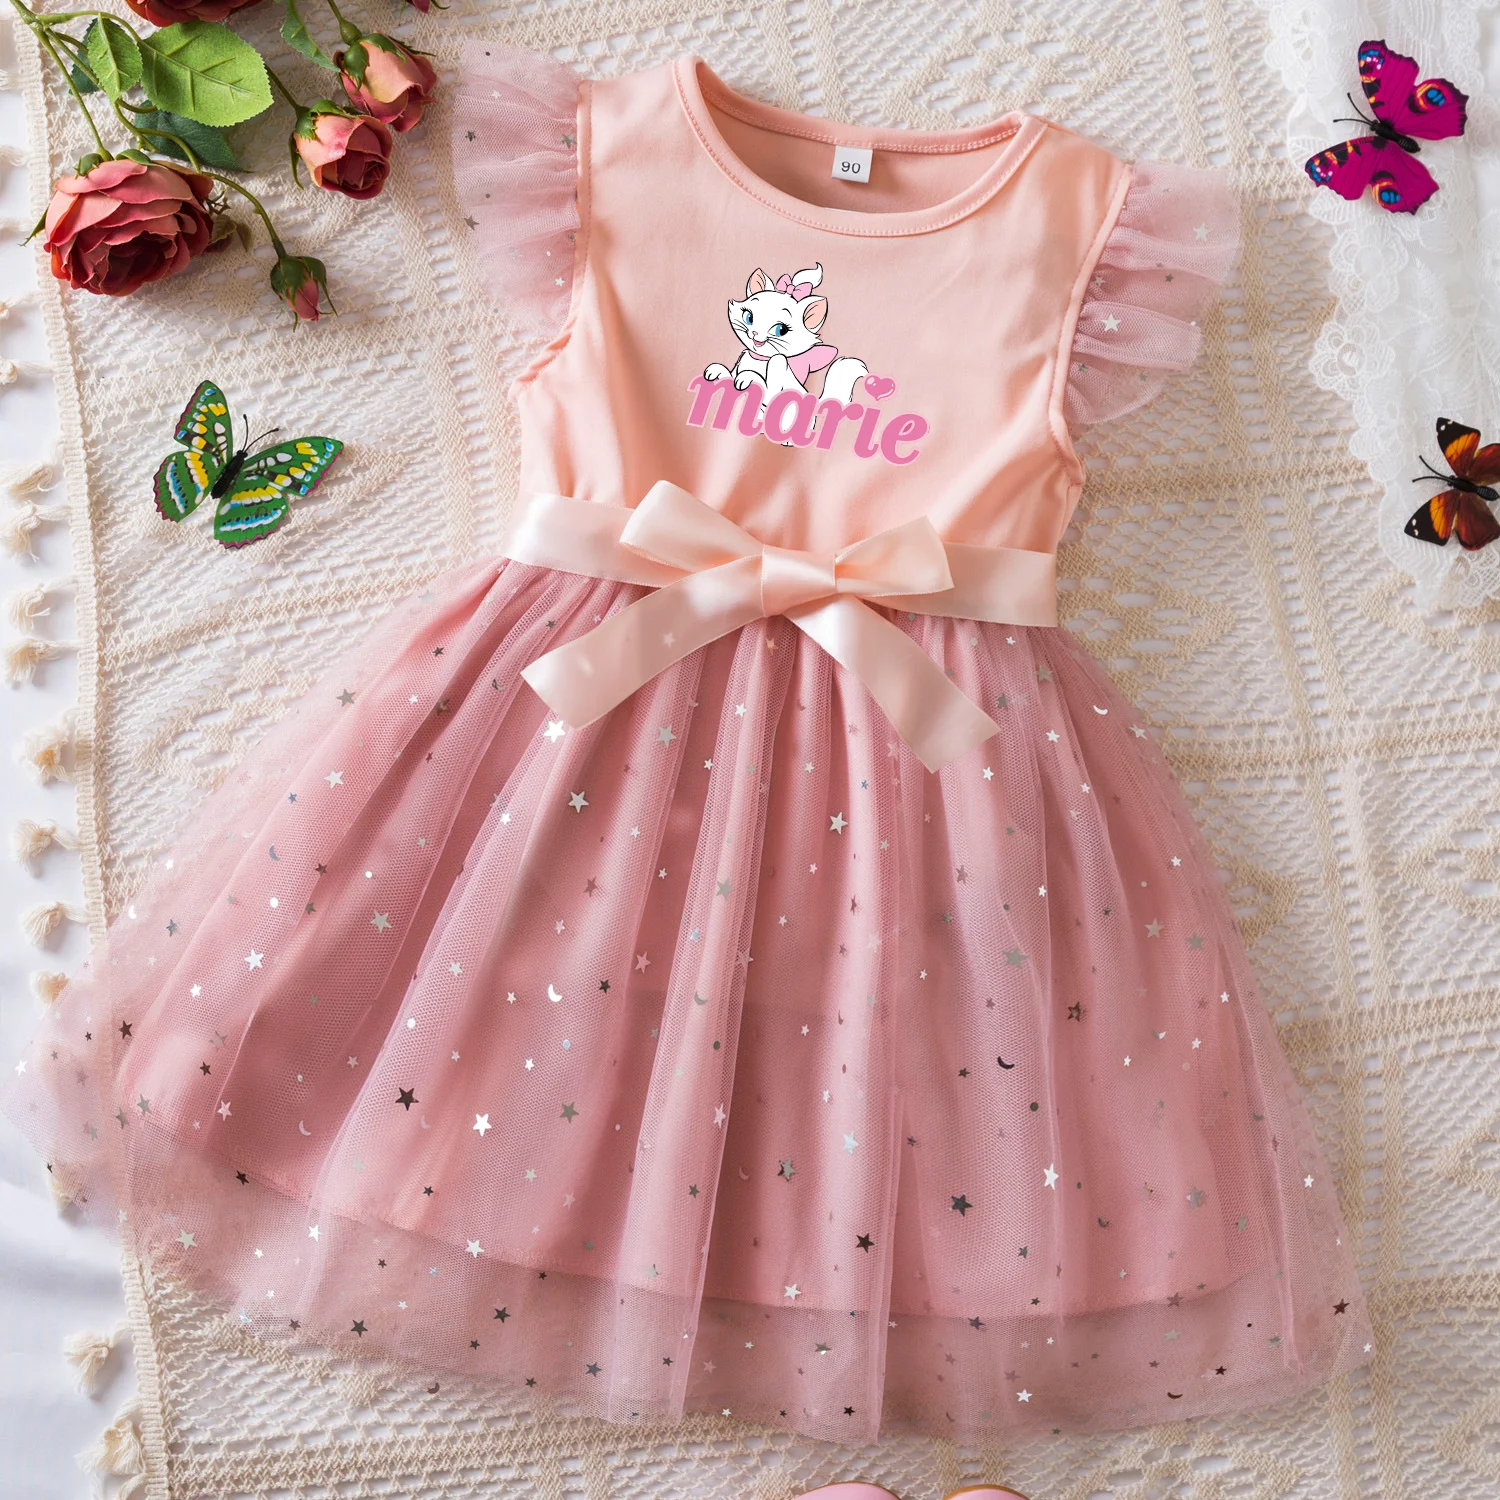 

The Aristocats Marie Cat Summer Toddler Girl Dress Princess Star Baby Girls Clothes Tulle Dress for Children Party Dress 2-6Y